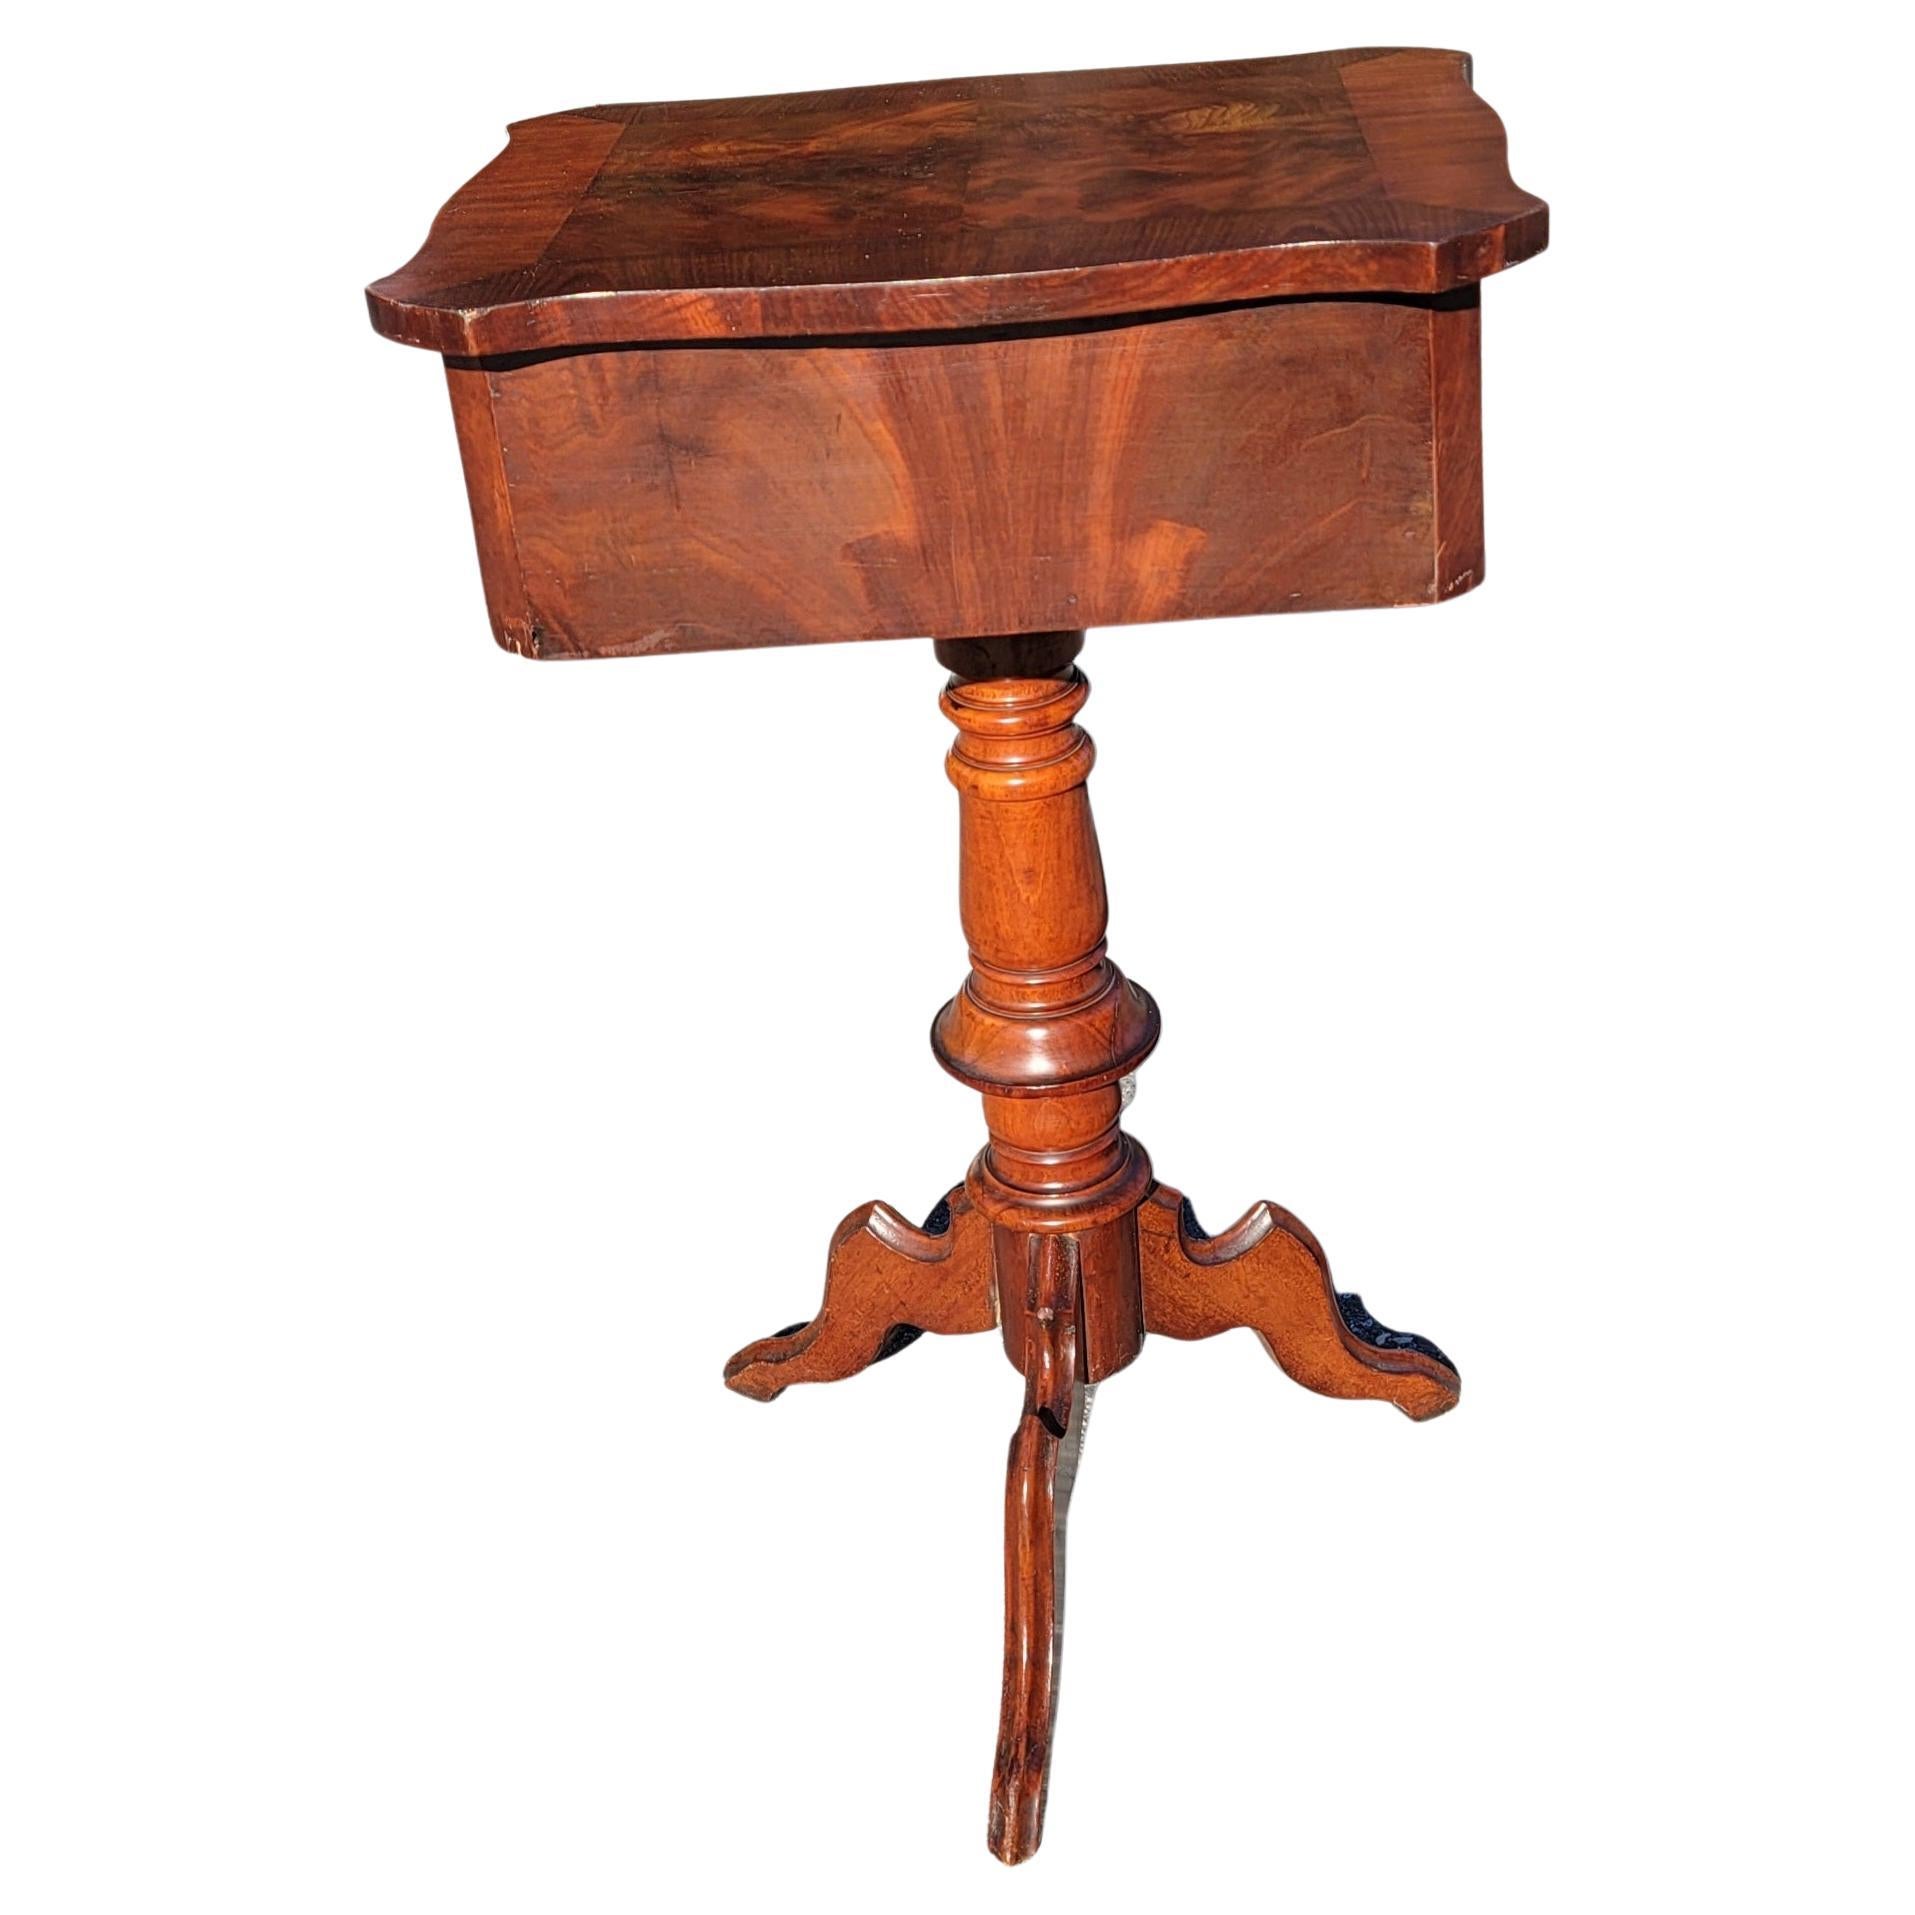 Biedermeier Flame Mahogany Pedestal 2-Drawer Side Table / Sewing Table, C. 1840 For Sale 2